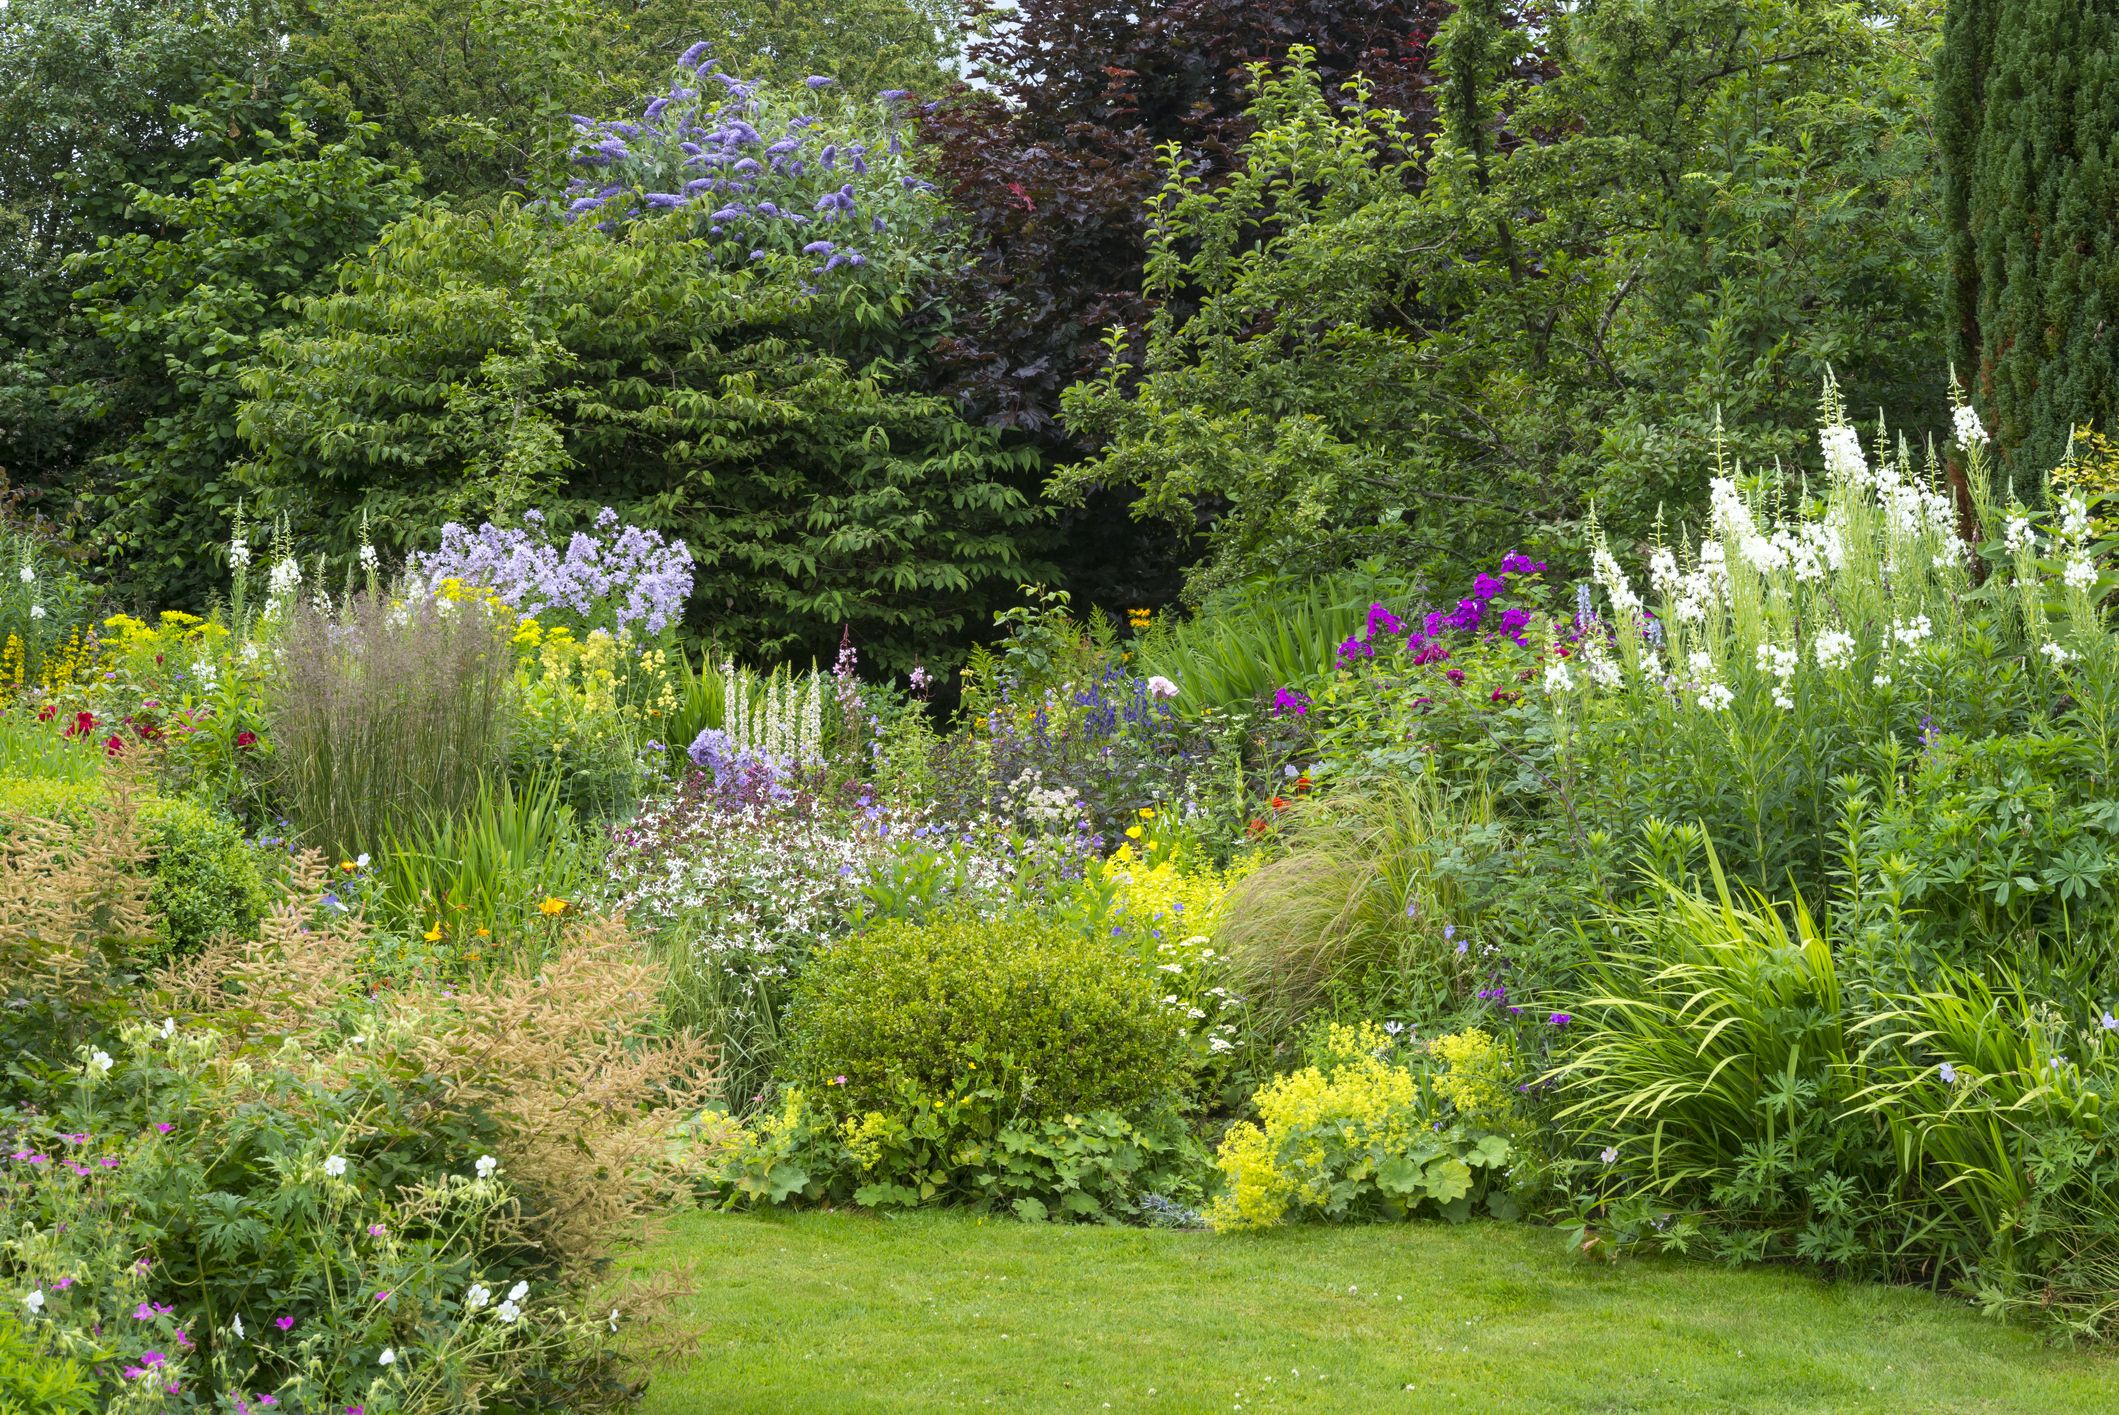 How To Plant an English Garden